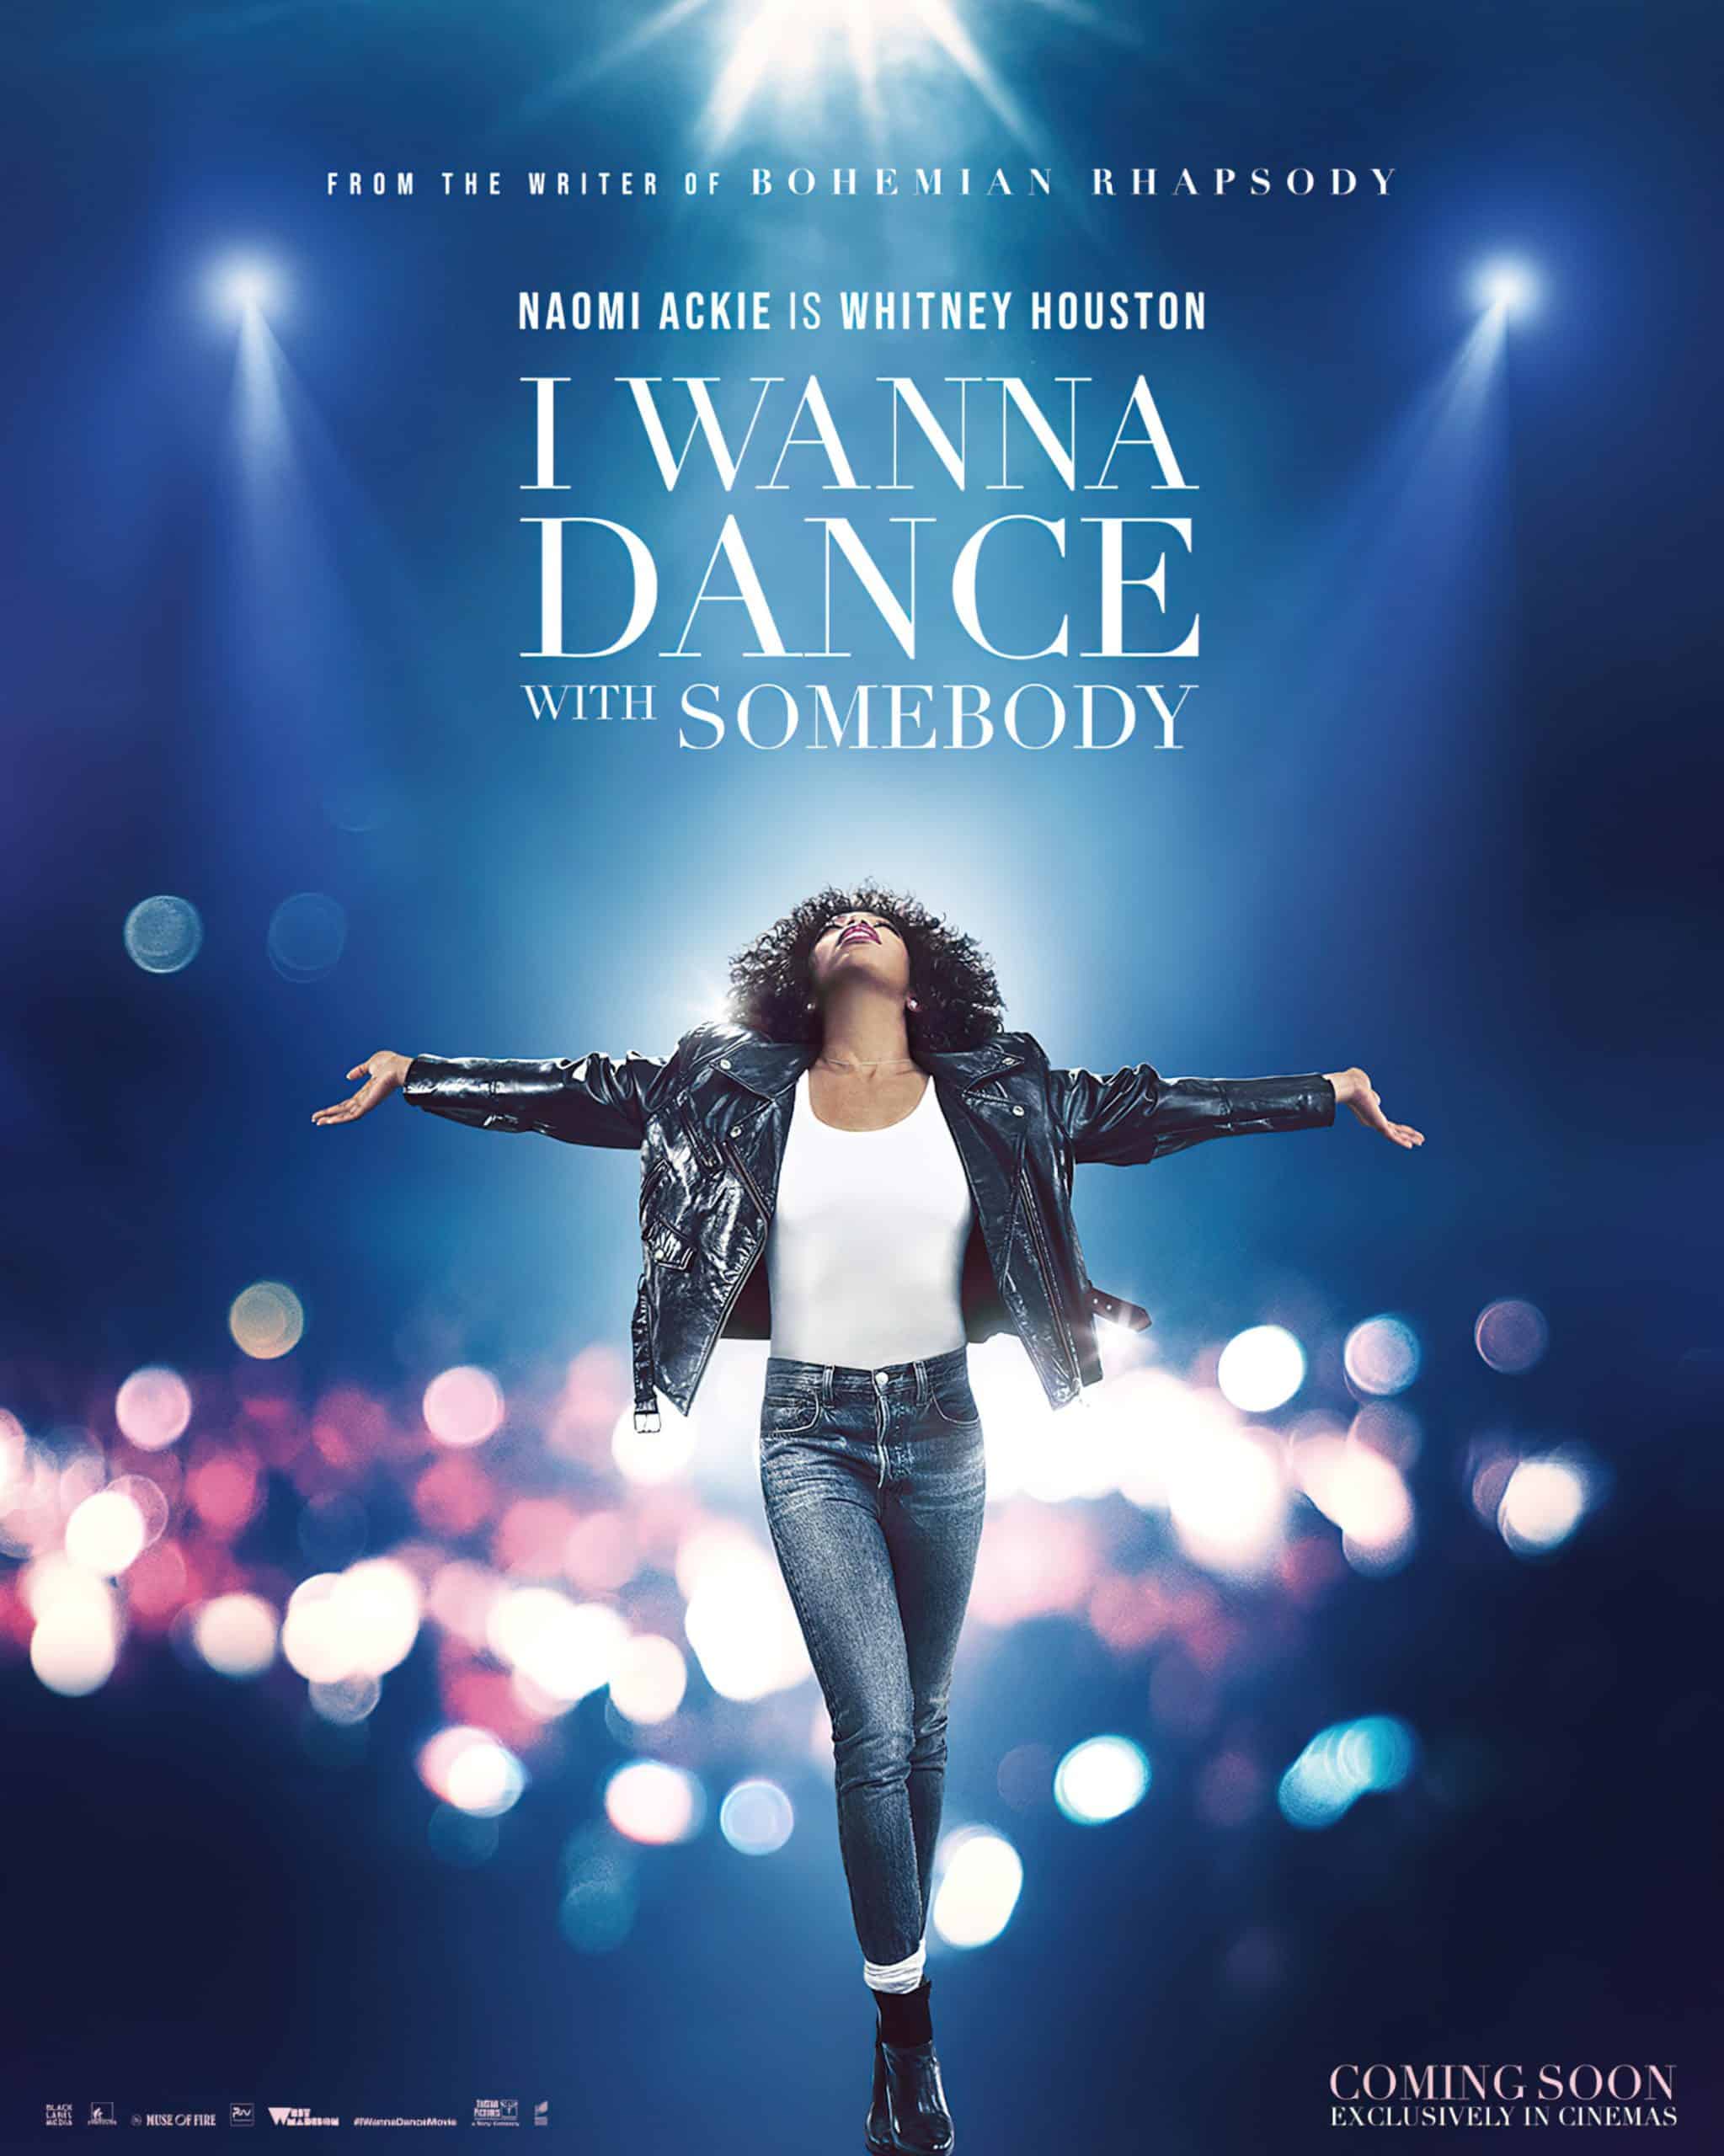 I WANNA DANCE WITH SOMEBODY, advance poster, Naomi Ackie as Whitney Houston, 2022